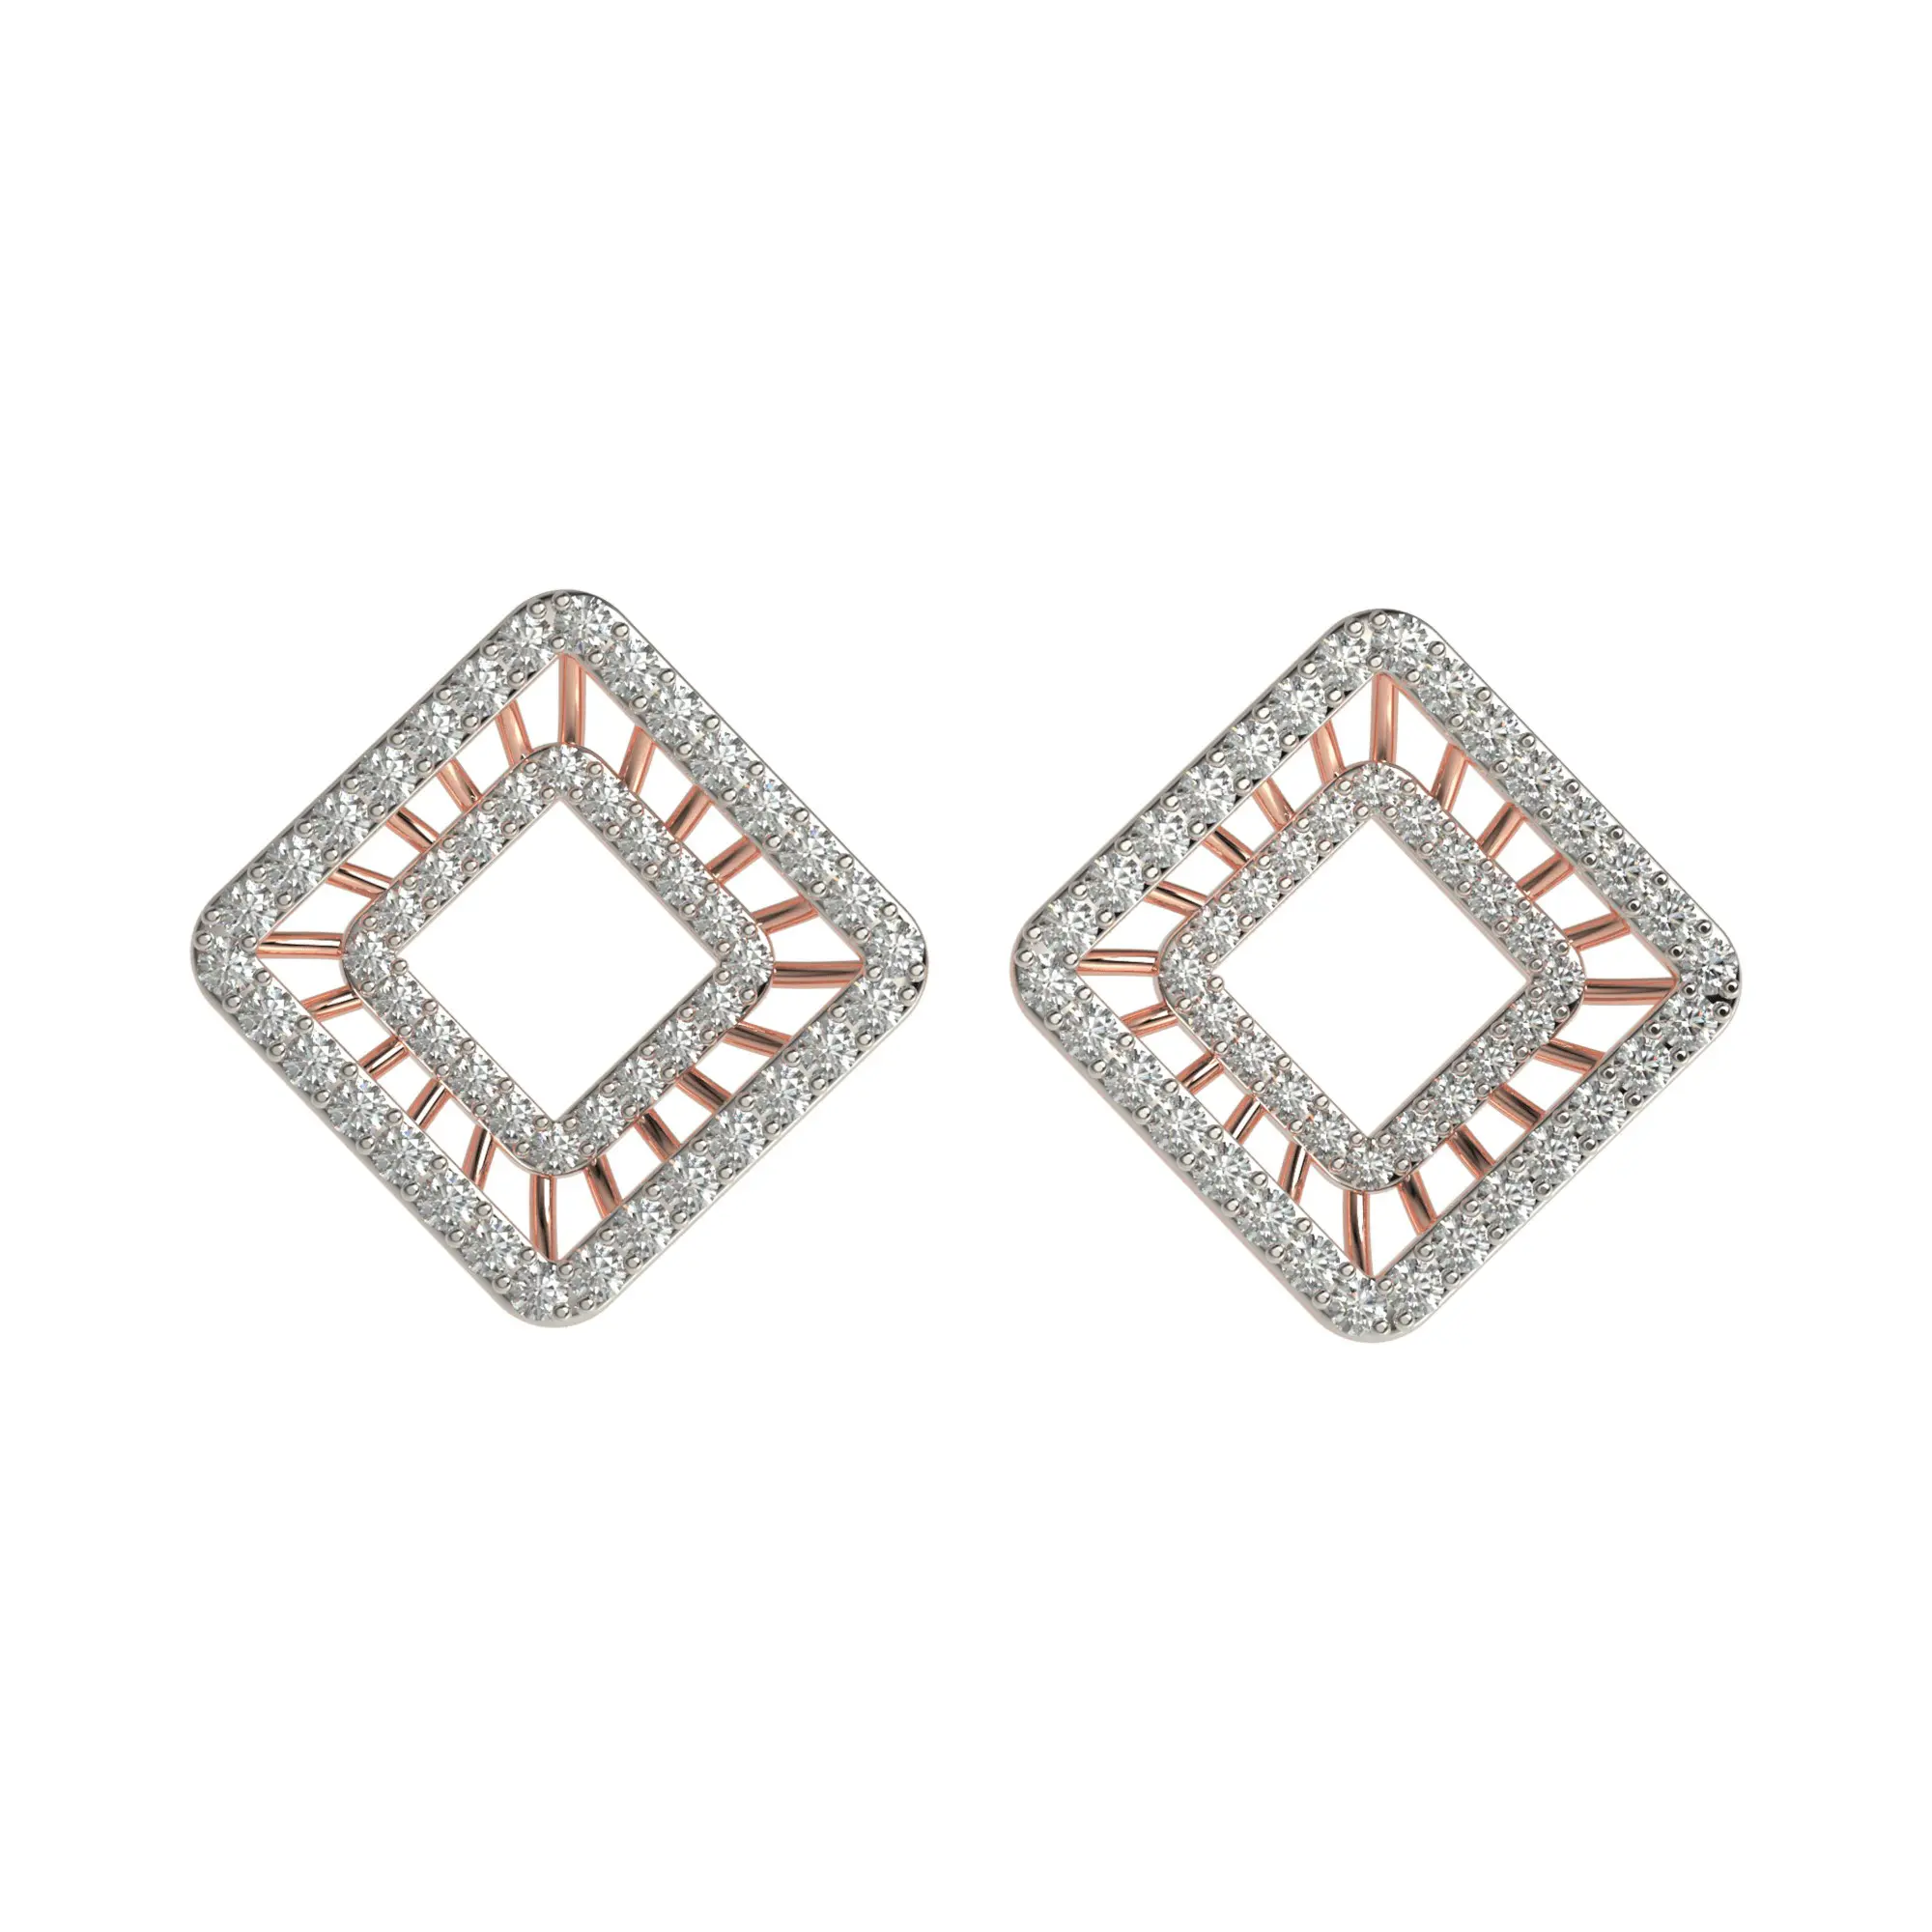 Concentric Diamond Earrings